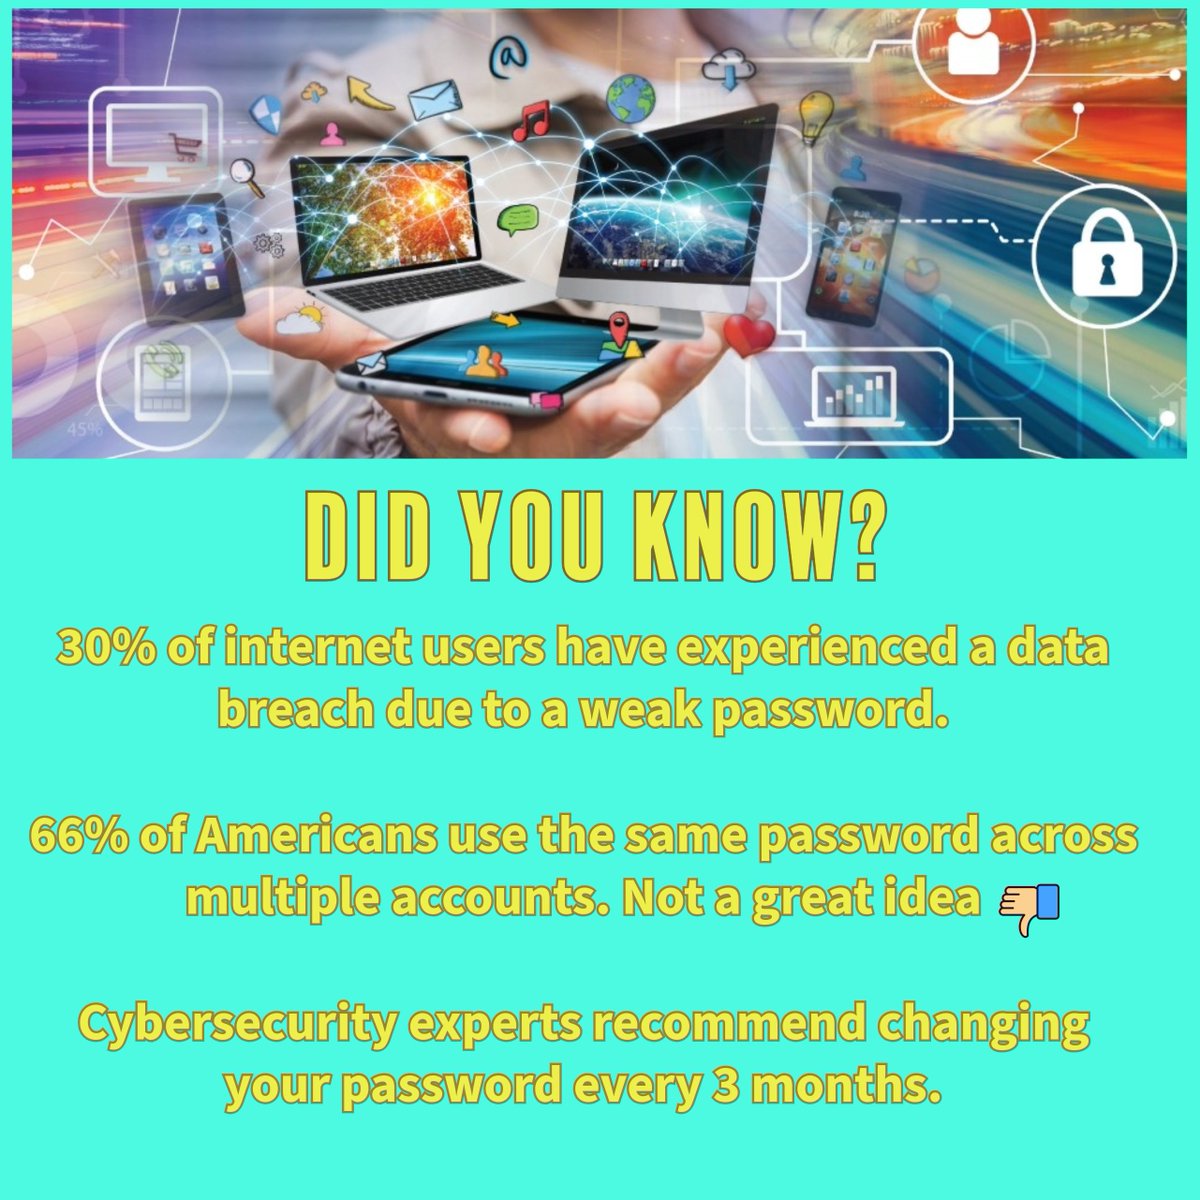 Happy Friday Clayton County! Remember that re-using the same passwords and not updating them regularly can lead to your accounts getting hacked! This weekend, think of a strong password to help protect your data! #digitalequity #access4clayton #digitalinclusion #claytoncountyga